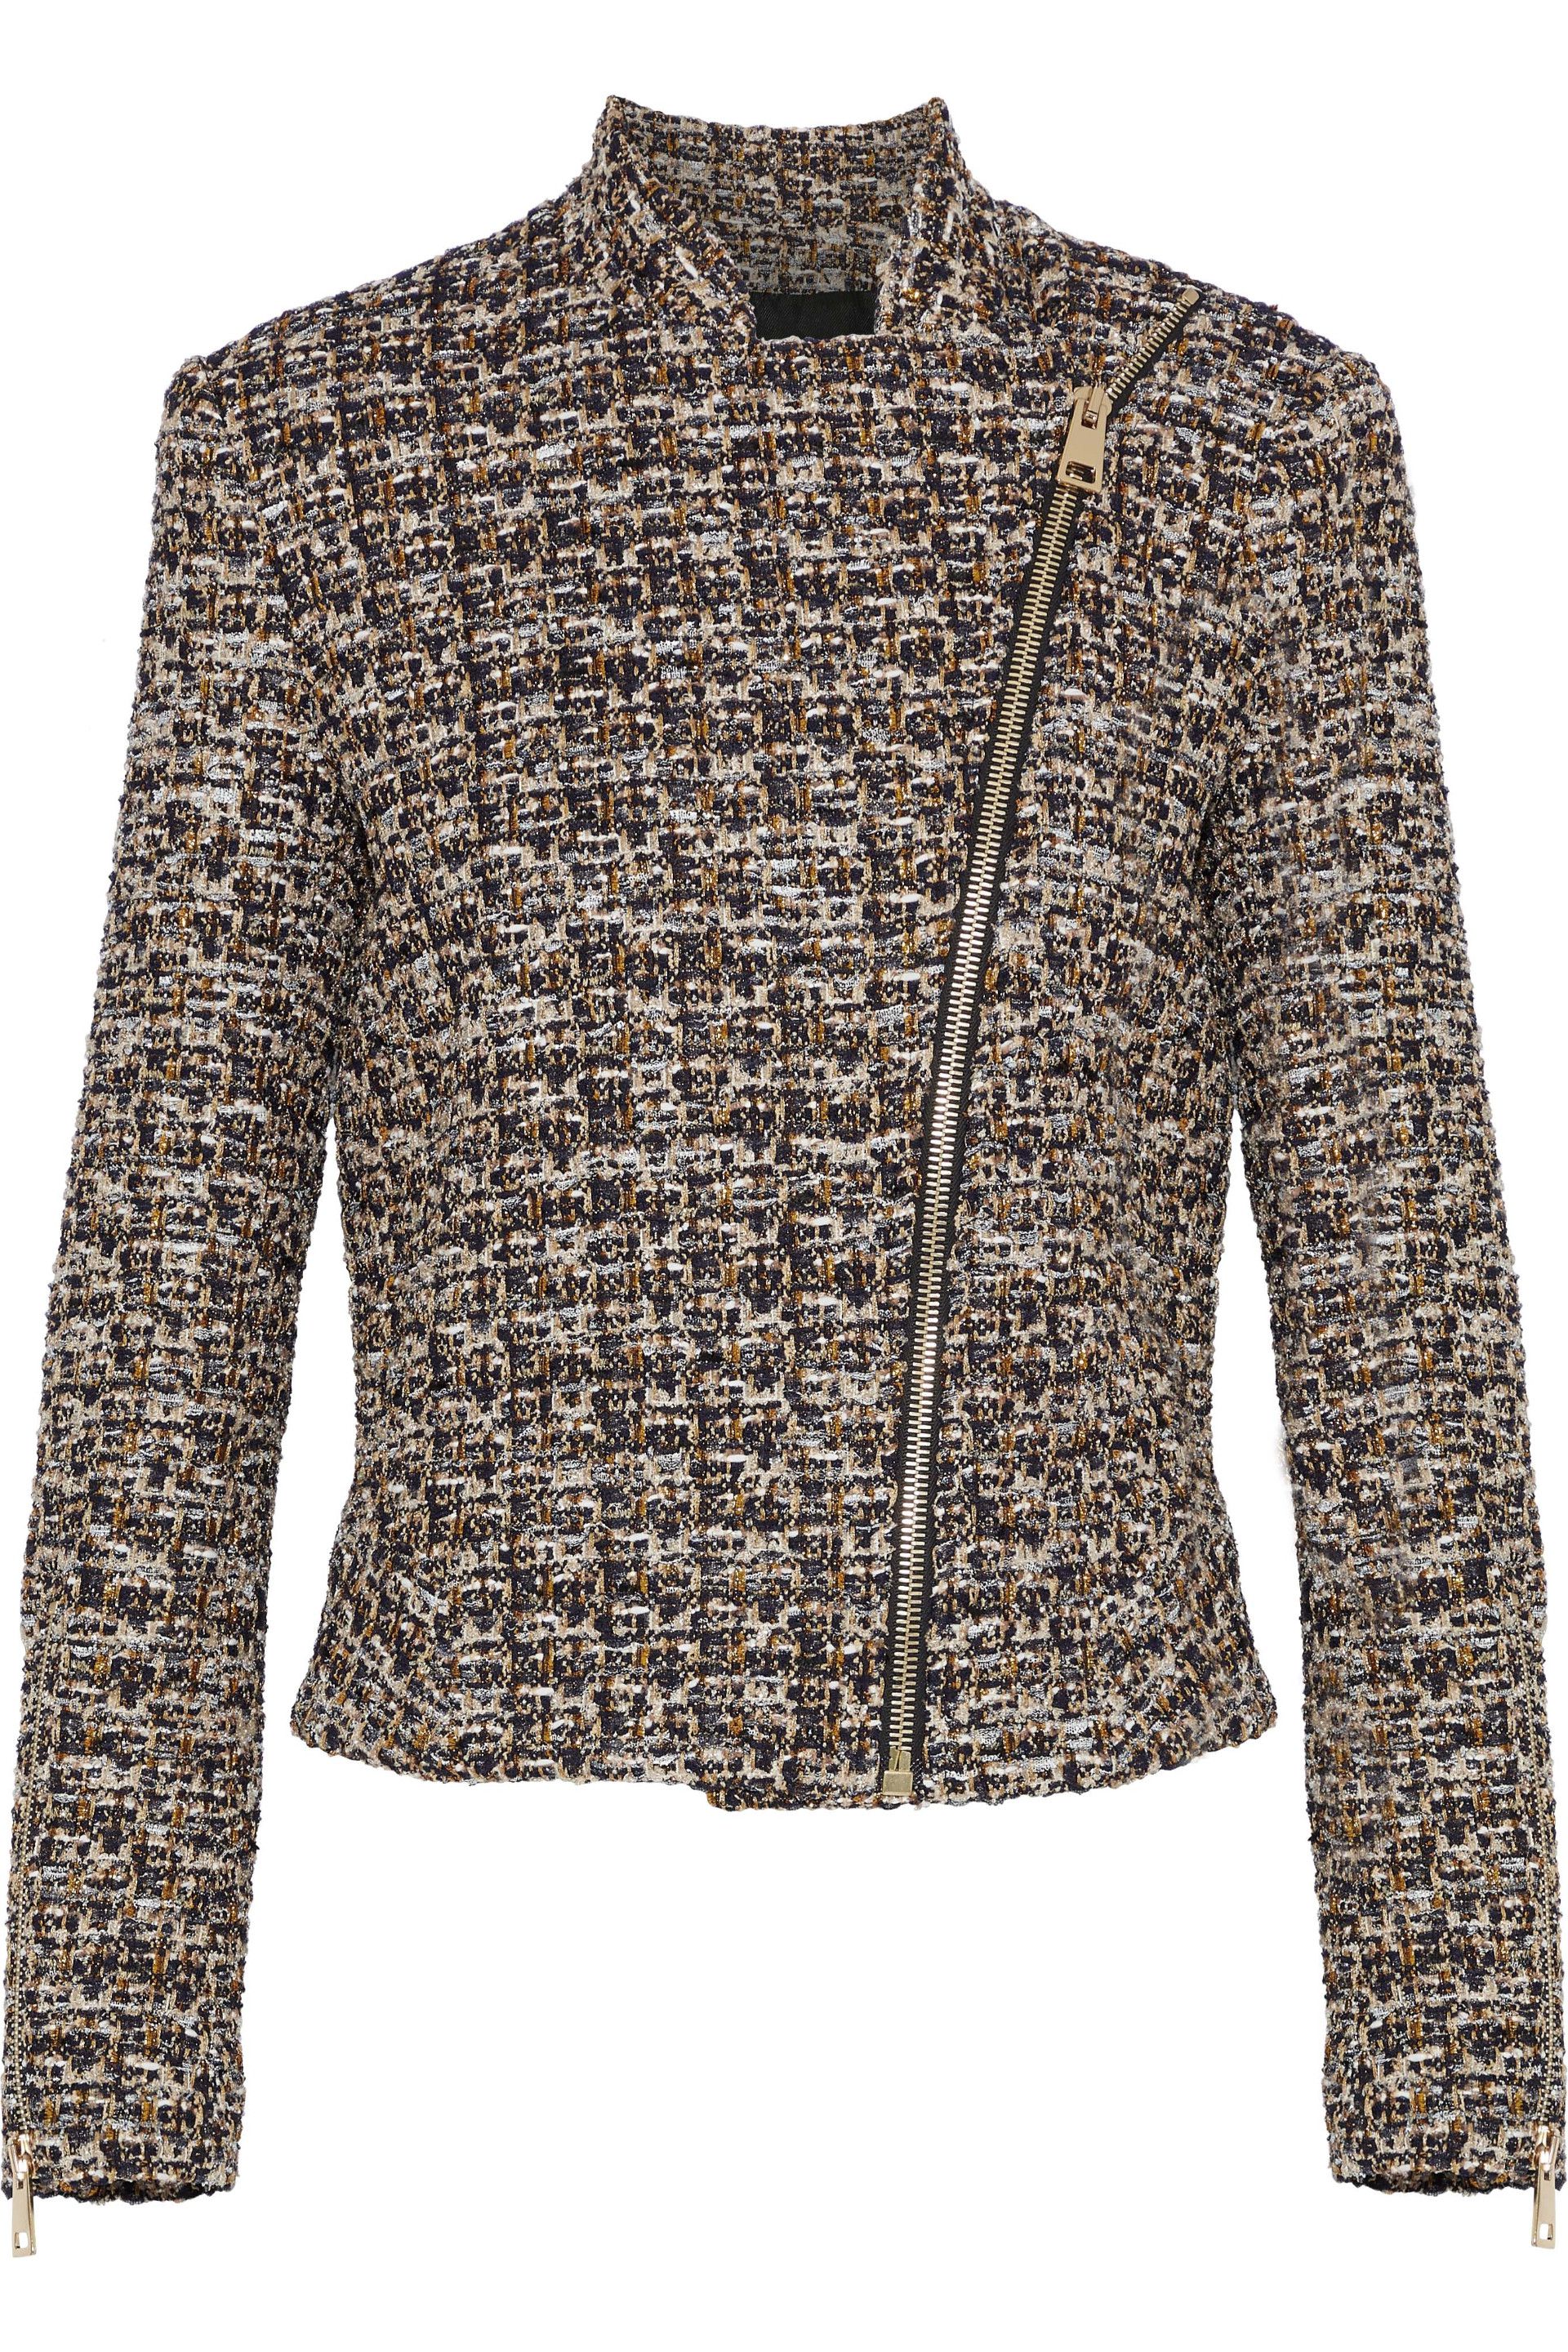 Designer Tweed Jackets | Sale Up To 70% Off At THE OUTNET